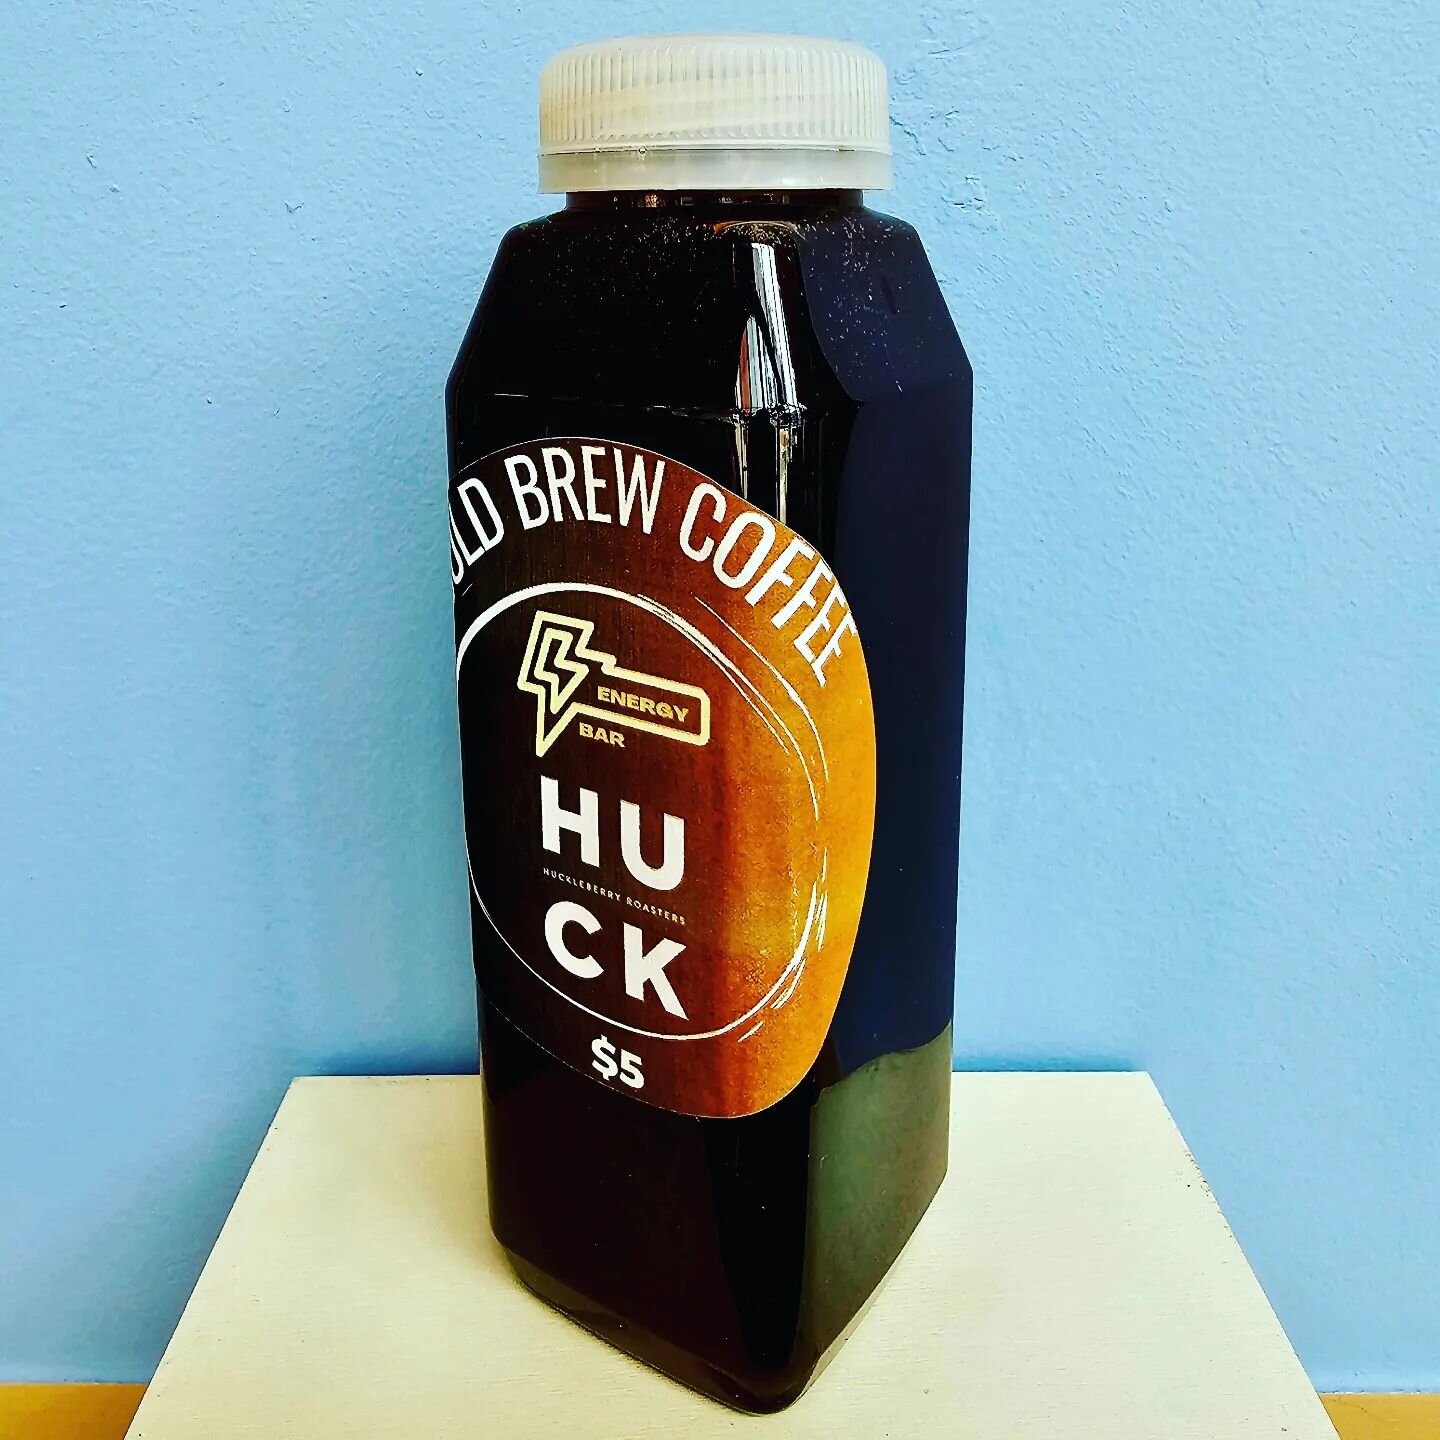 We are proud to feature @huckleberryroasters coffee in all our #coffee drinks! Our #housemade bottled #coldbrew coffee is made with the Sound &amp; Vision Blend, which uses beans from Brazil, Peru, and Ethiopia. Get your portable #caffeinefix today!